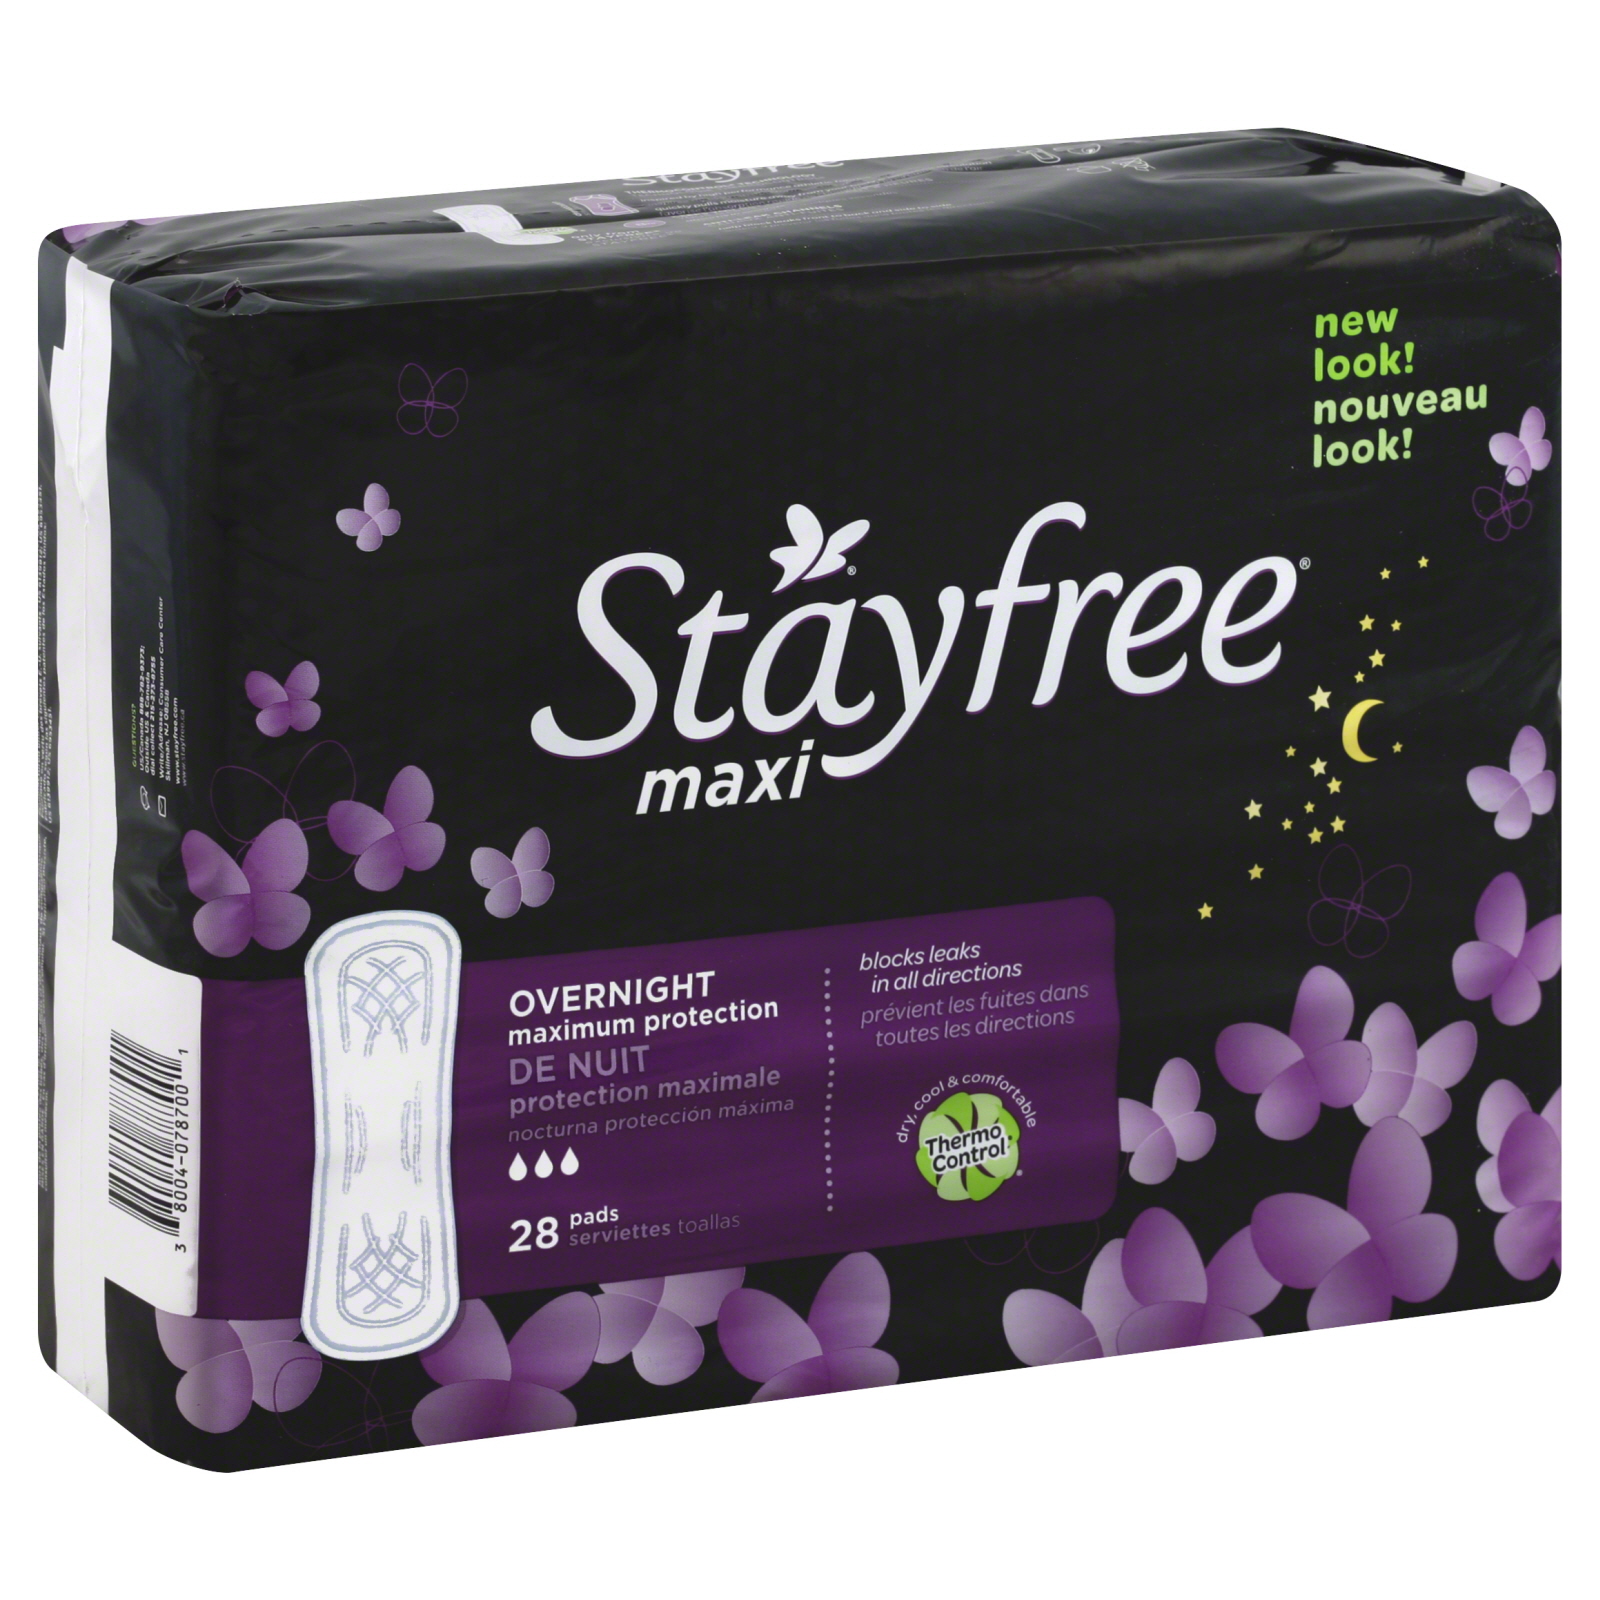 Stayfree Pads, Maxi, Overnight Maximum Protection, 28 Pads